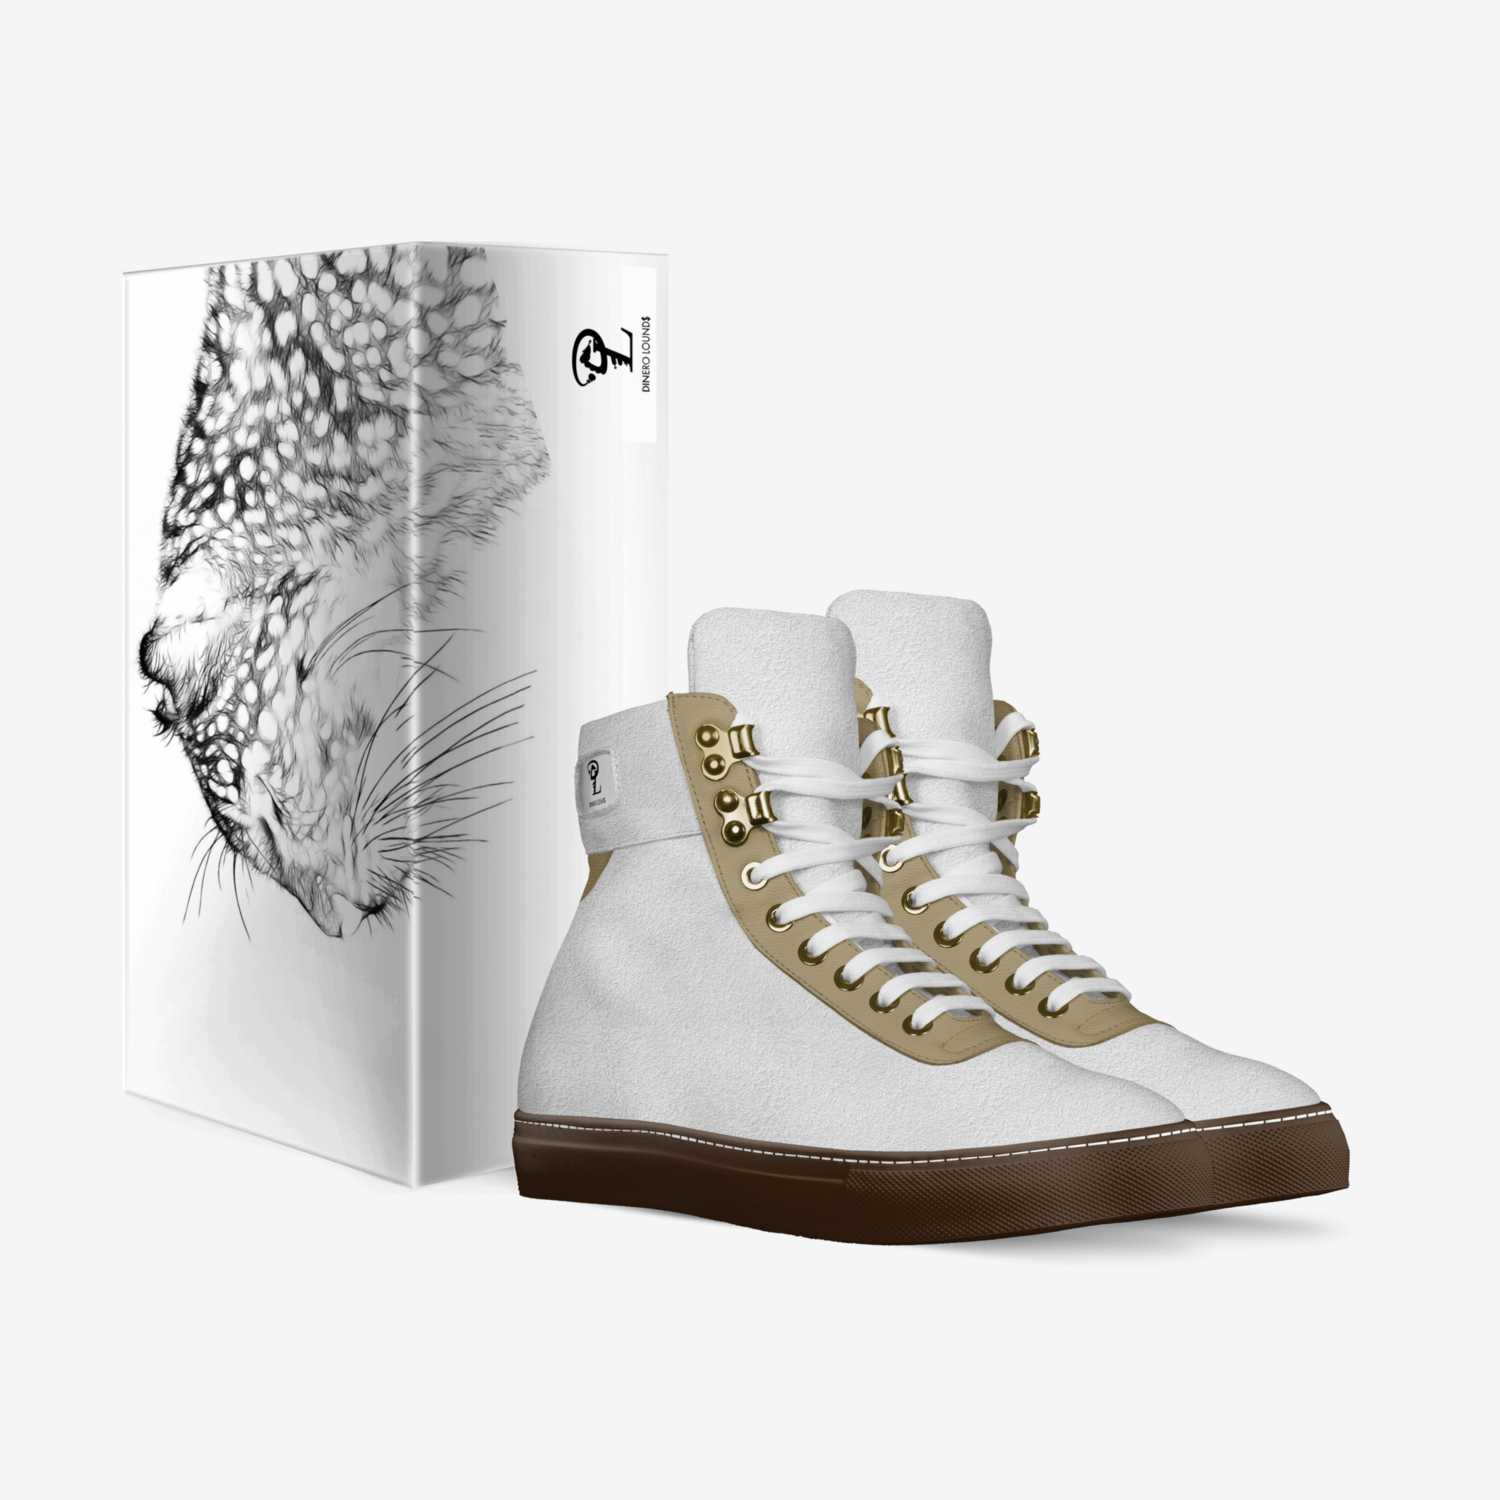 Dinero Lounds custom made in Italy shoes by Daryl Lounds | Box view